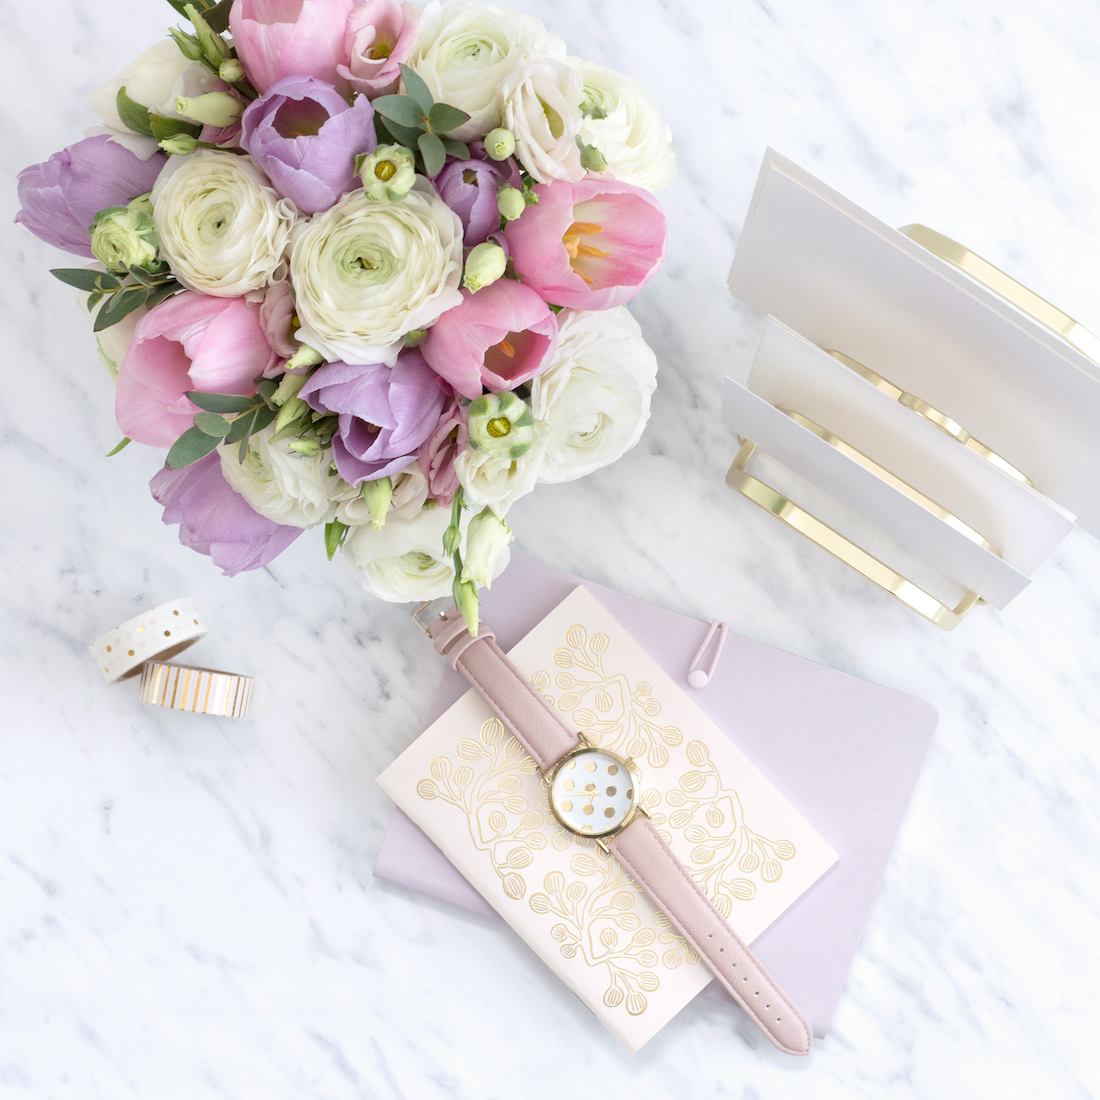 New To The Wedding Industry? Here’s How To Get Connected, Something New for I Do, Wedding PR Tips, Wedding Public Relations, Wedding Industry, Small Business, TuesdaysTogether